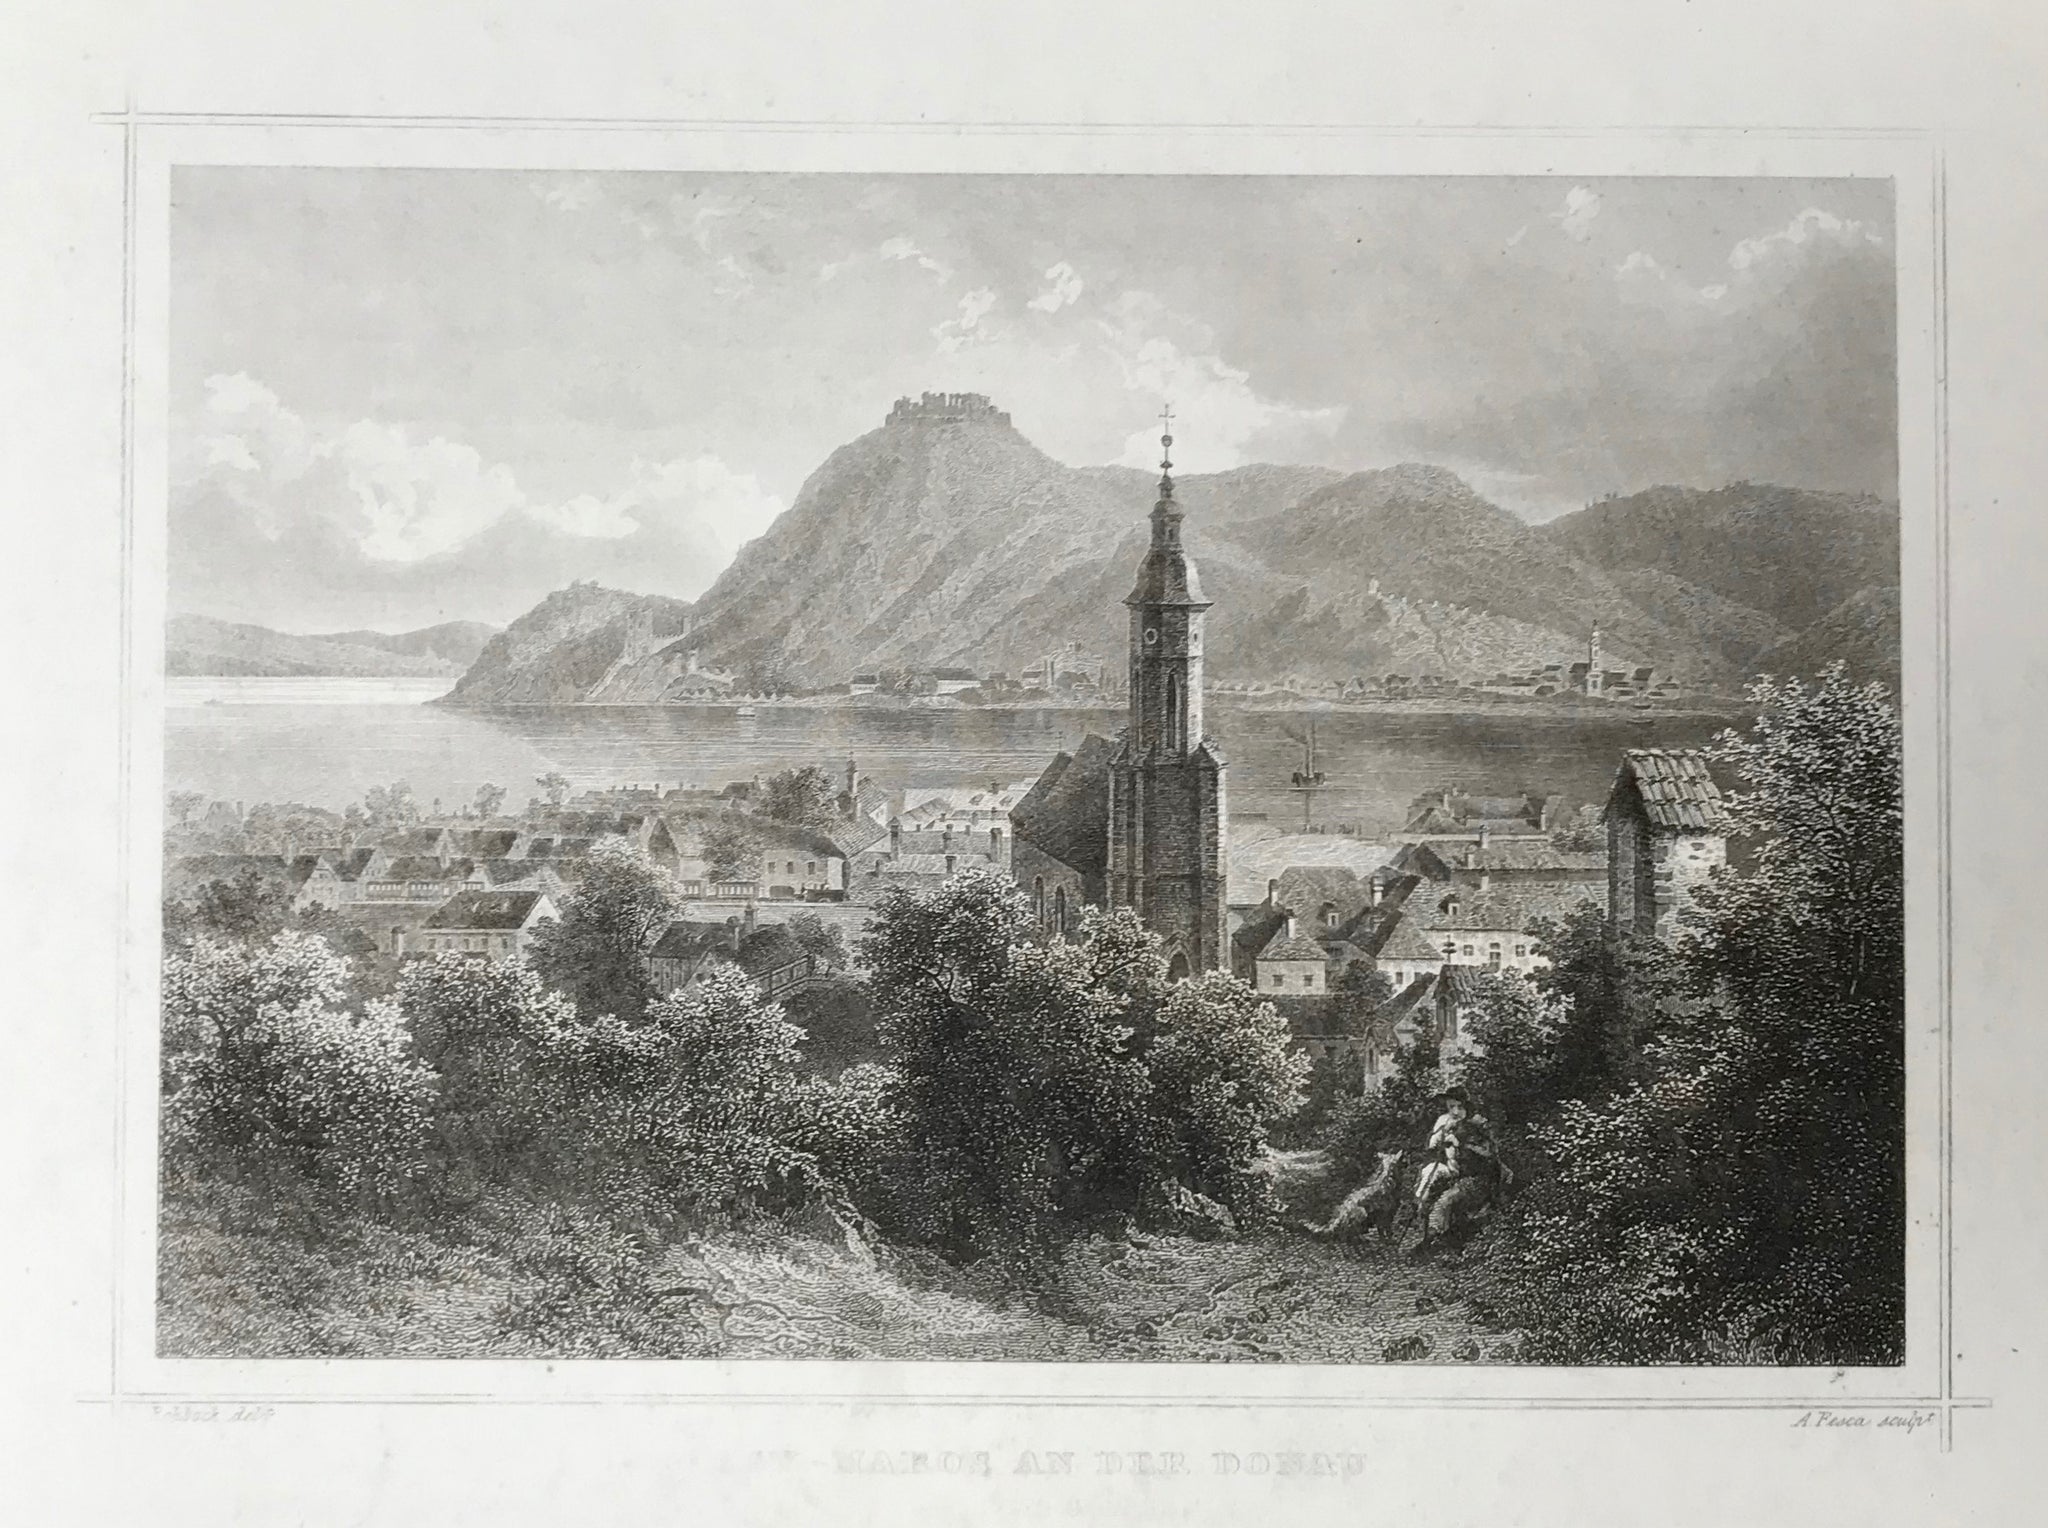 Hungary, Maros an der Donau  Steel engraving by A. Fesca after Rohbock ca 1850. Title is very light and faded.